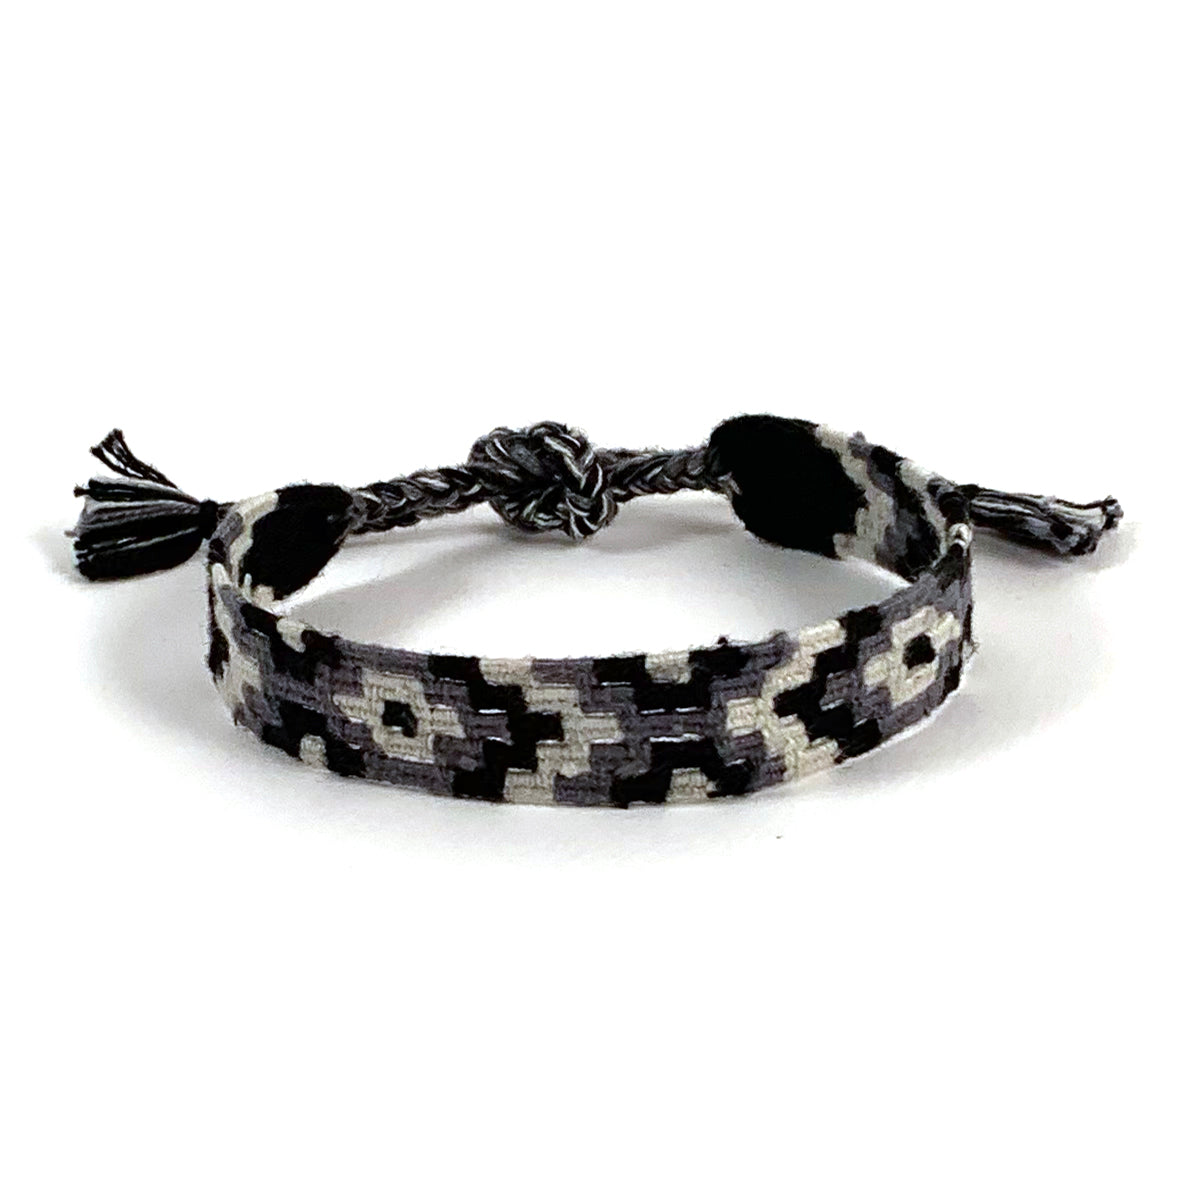 Friendship Bracelet Handcrafted in Mexico Woven Fair Trade X-Small